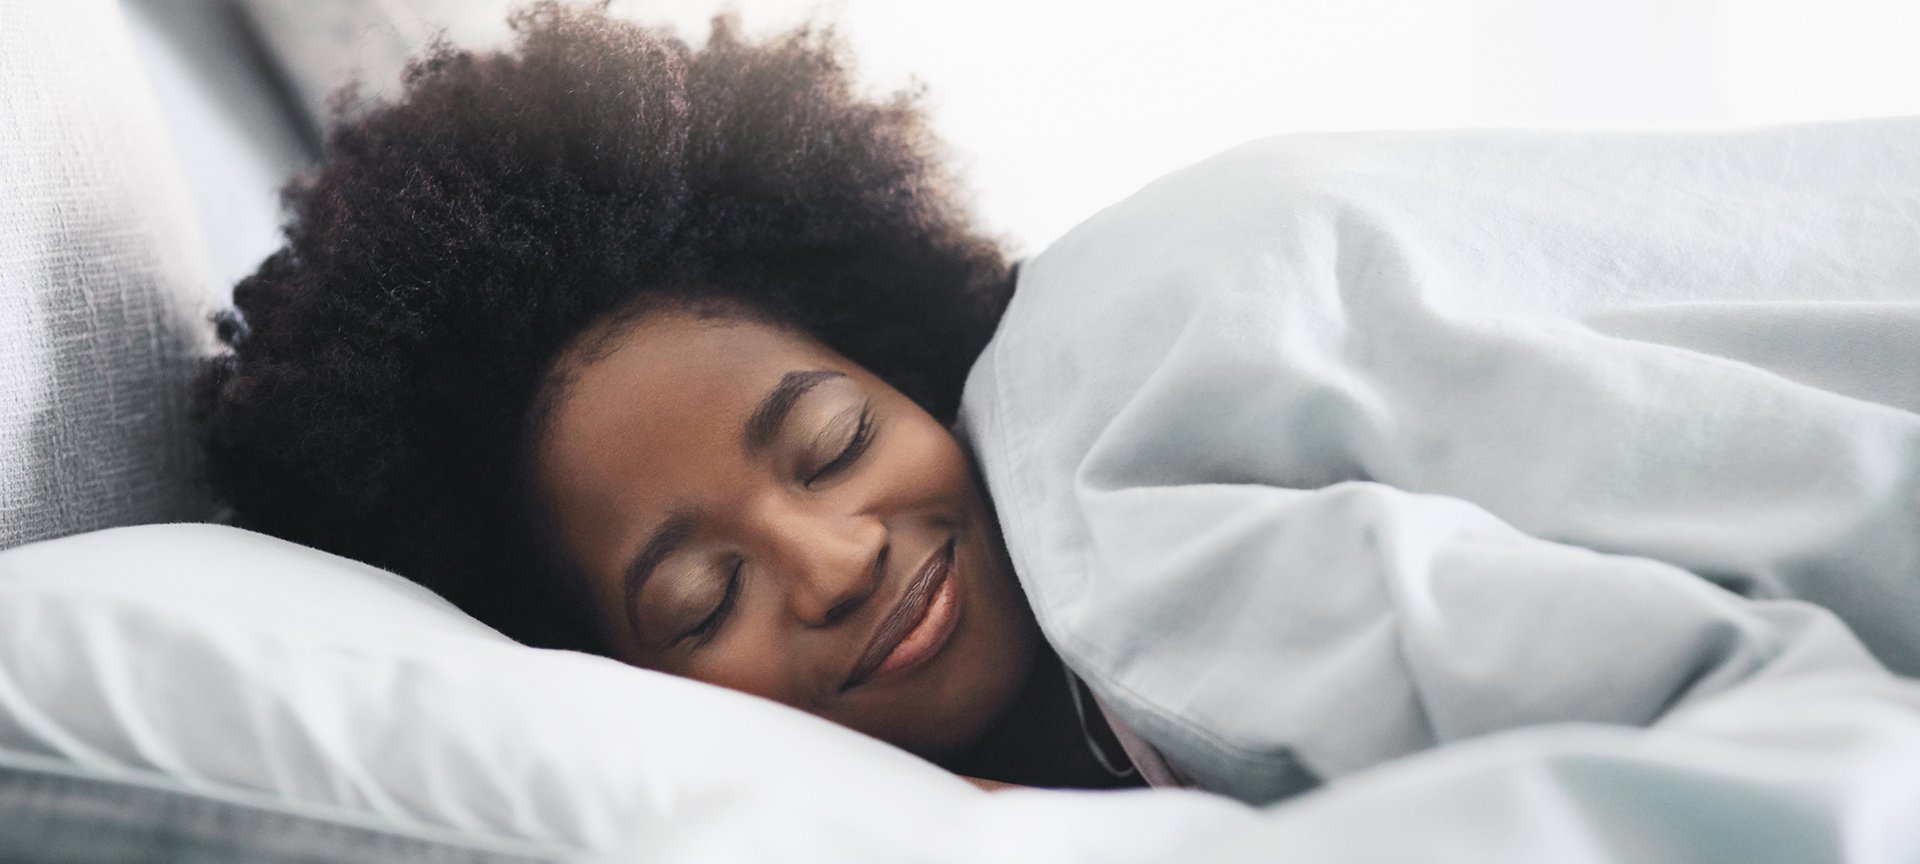 Protective Hairstyles for Sleeping: How to Protect Hair While You Sleep -  L'Oréal Paris